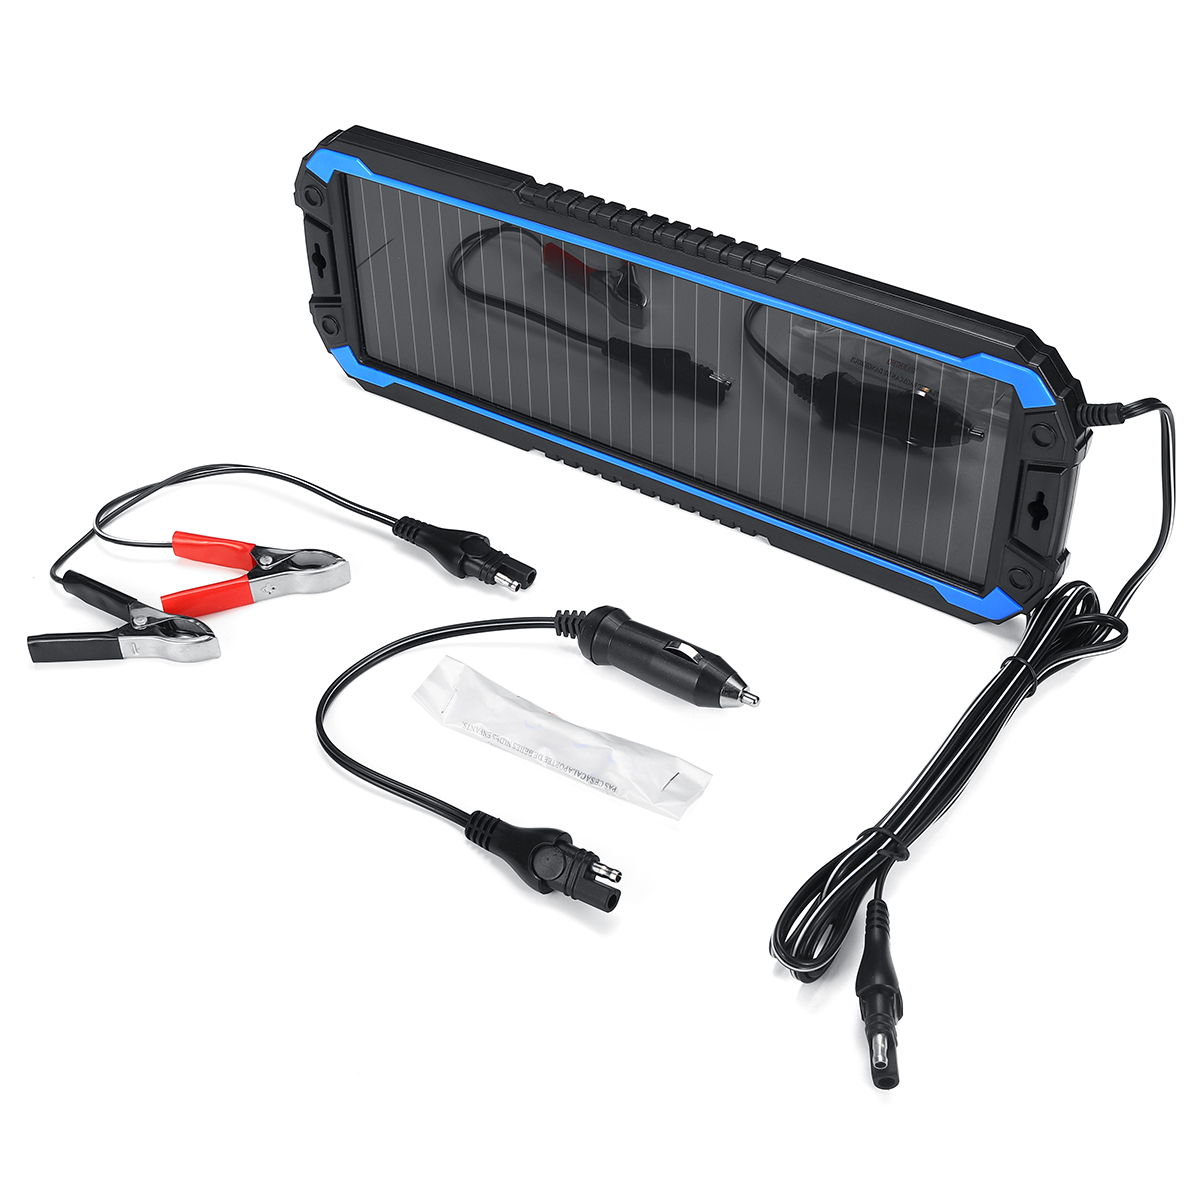 

1.5W 18V Portable Solar Panel Power Battery Charger Backup for Automotive Motorcycle Boat Marine RV etc